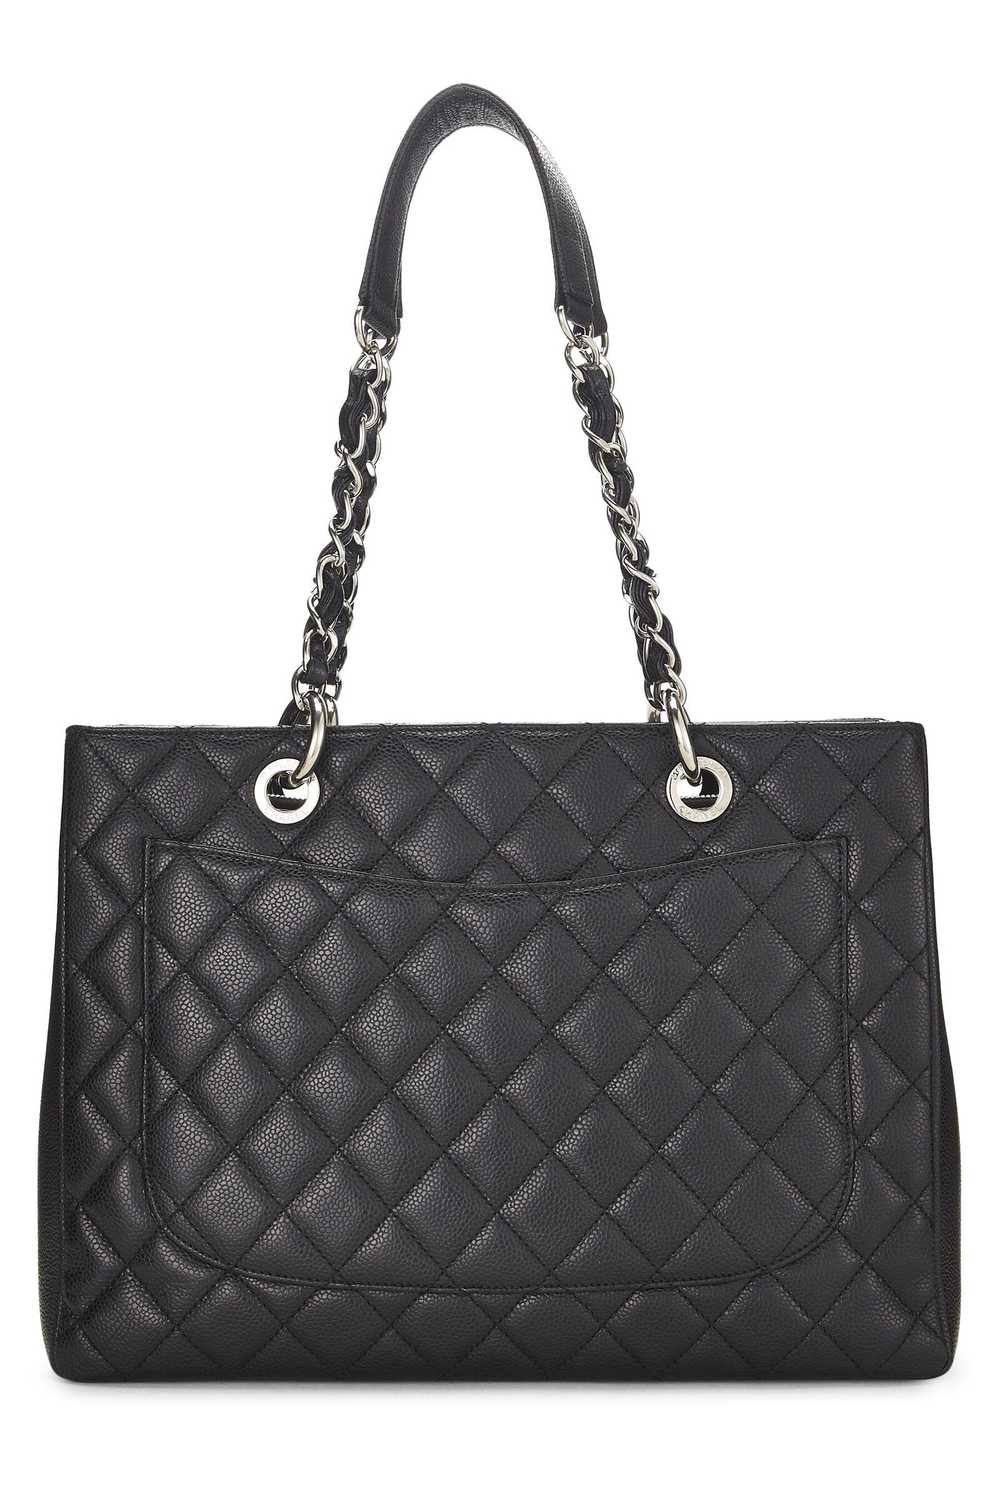 Black Quilted Caviar Grand Shopping Tote (GST) - image 4